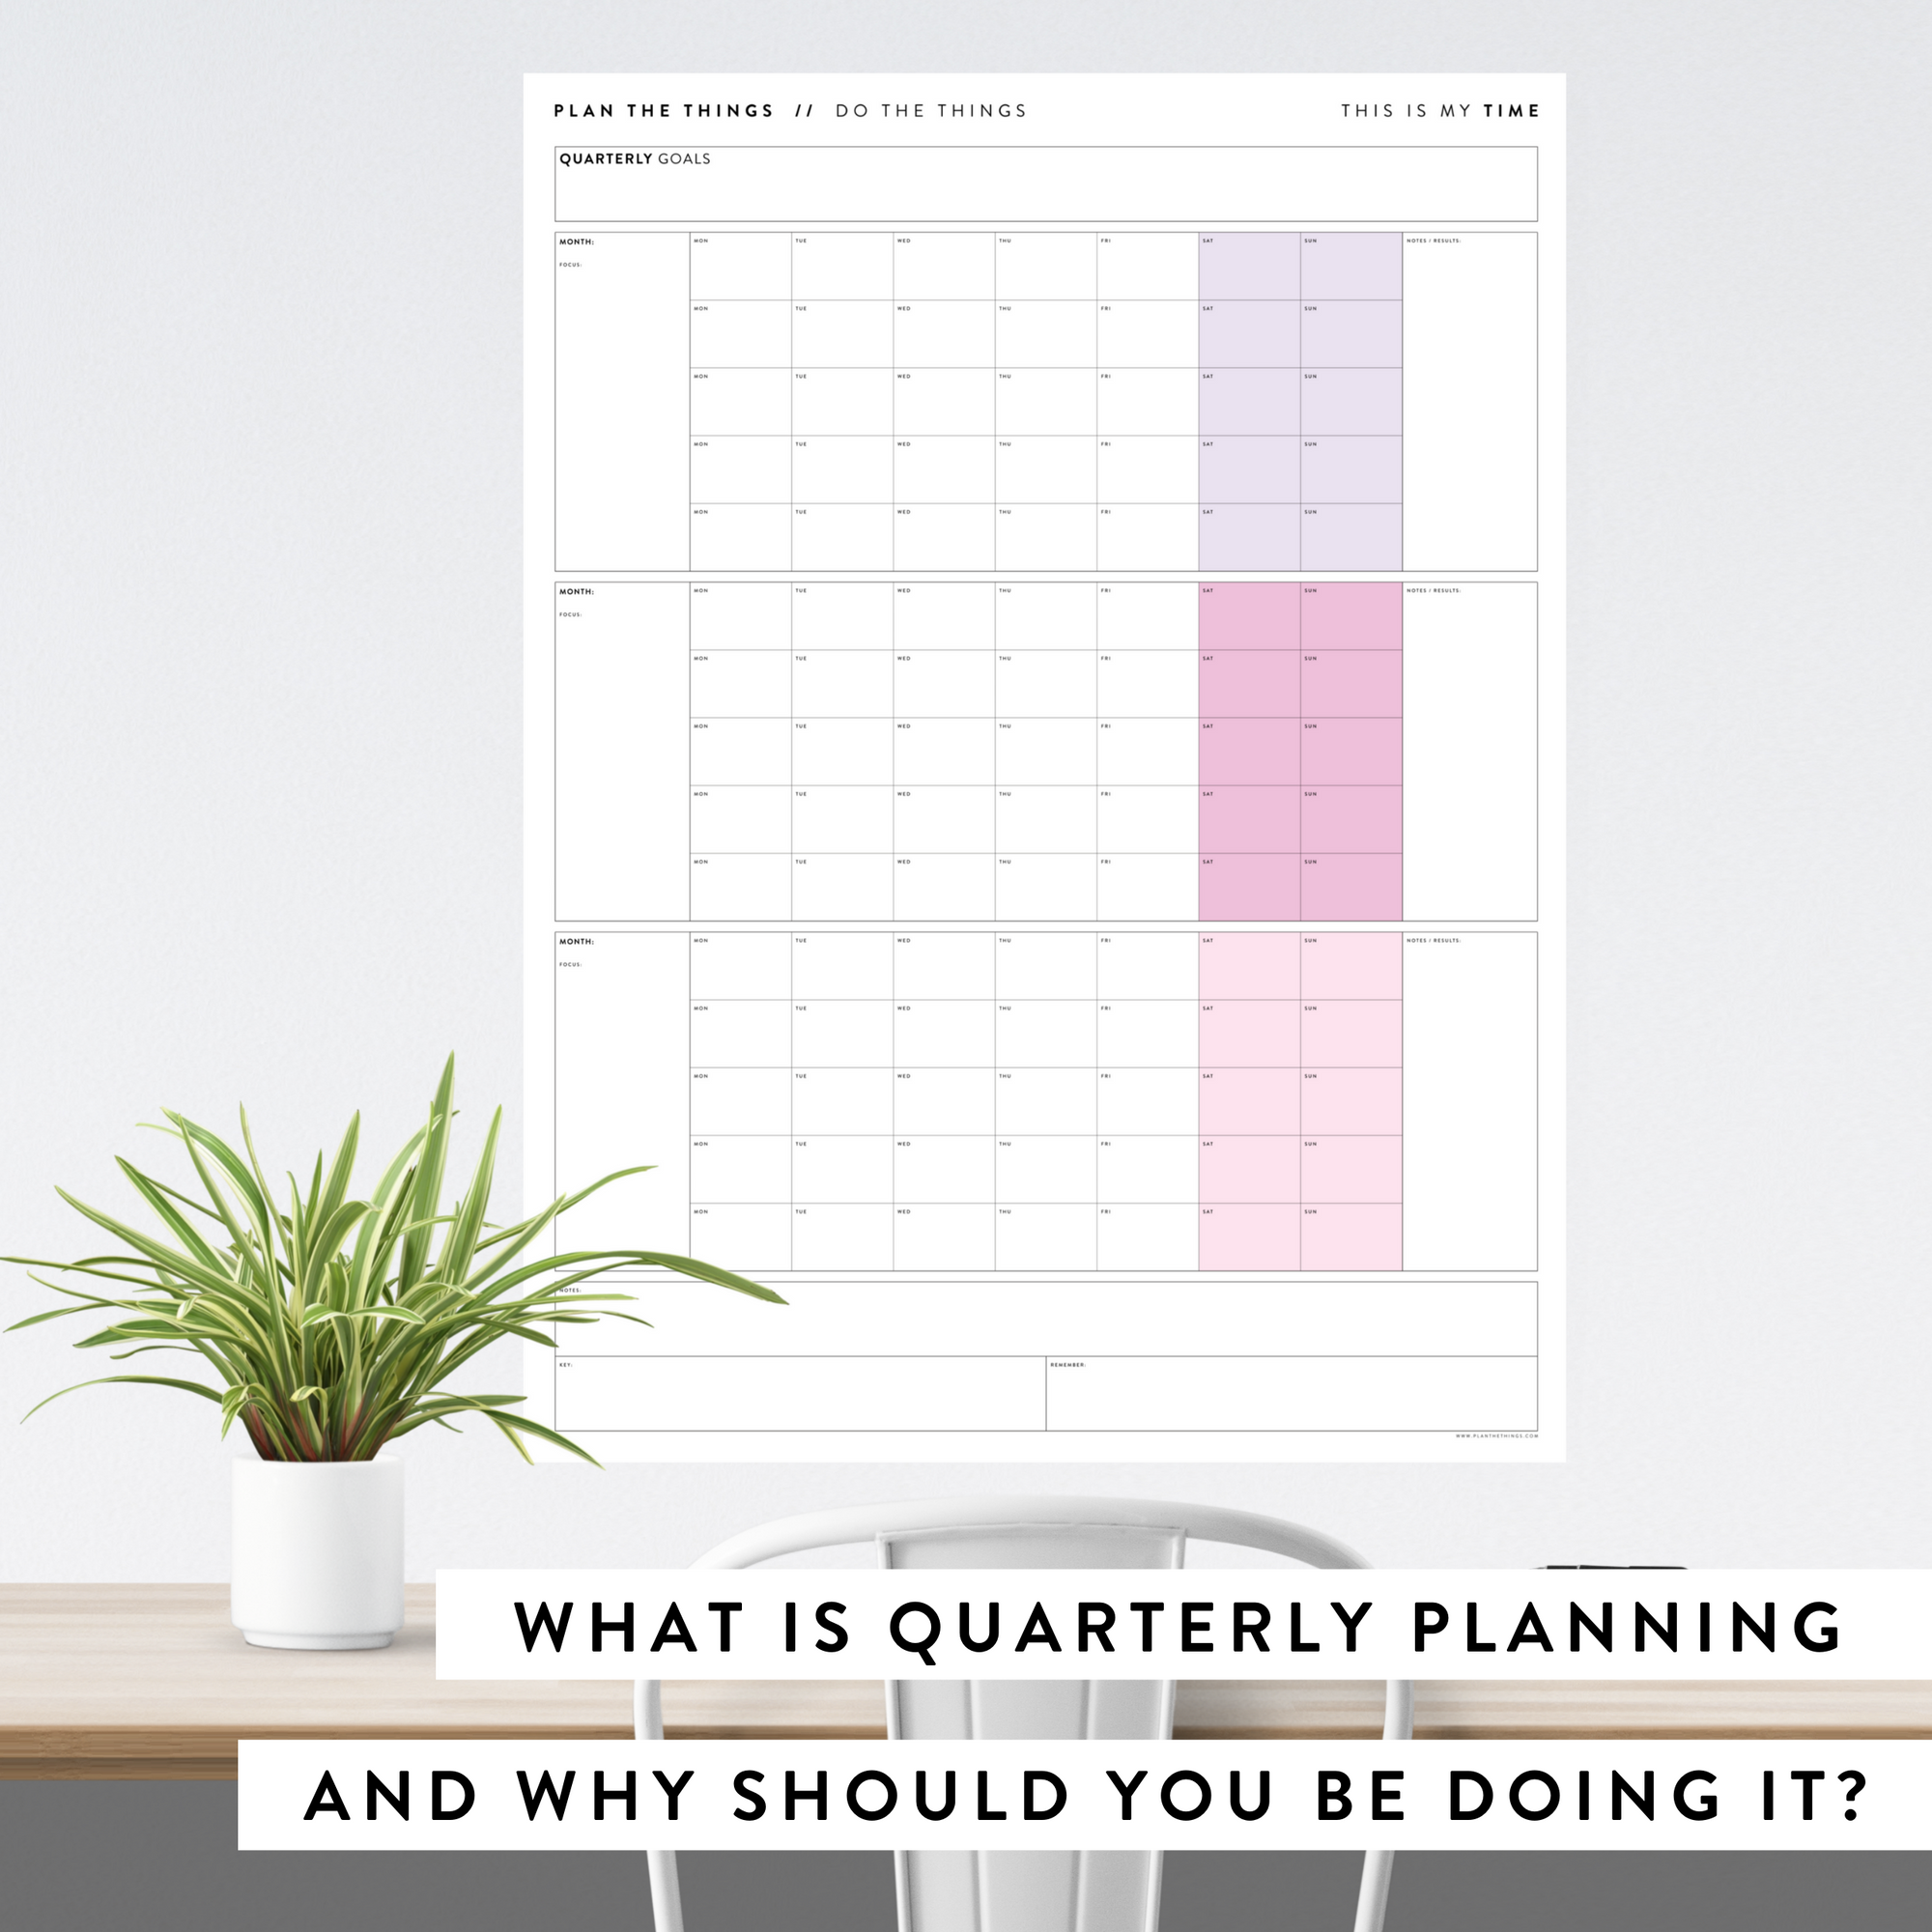 What is quarterly planning and why should you be doing it? Image of quarterly wall calendar on a wall behind a desk